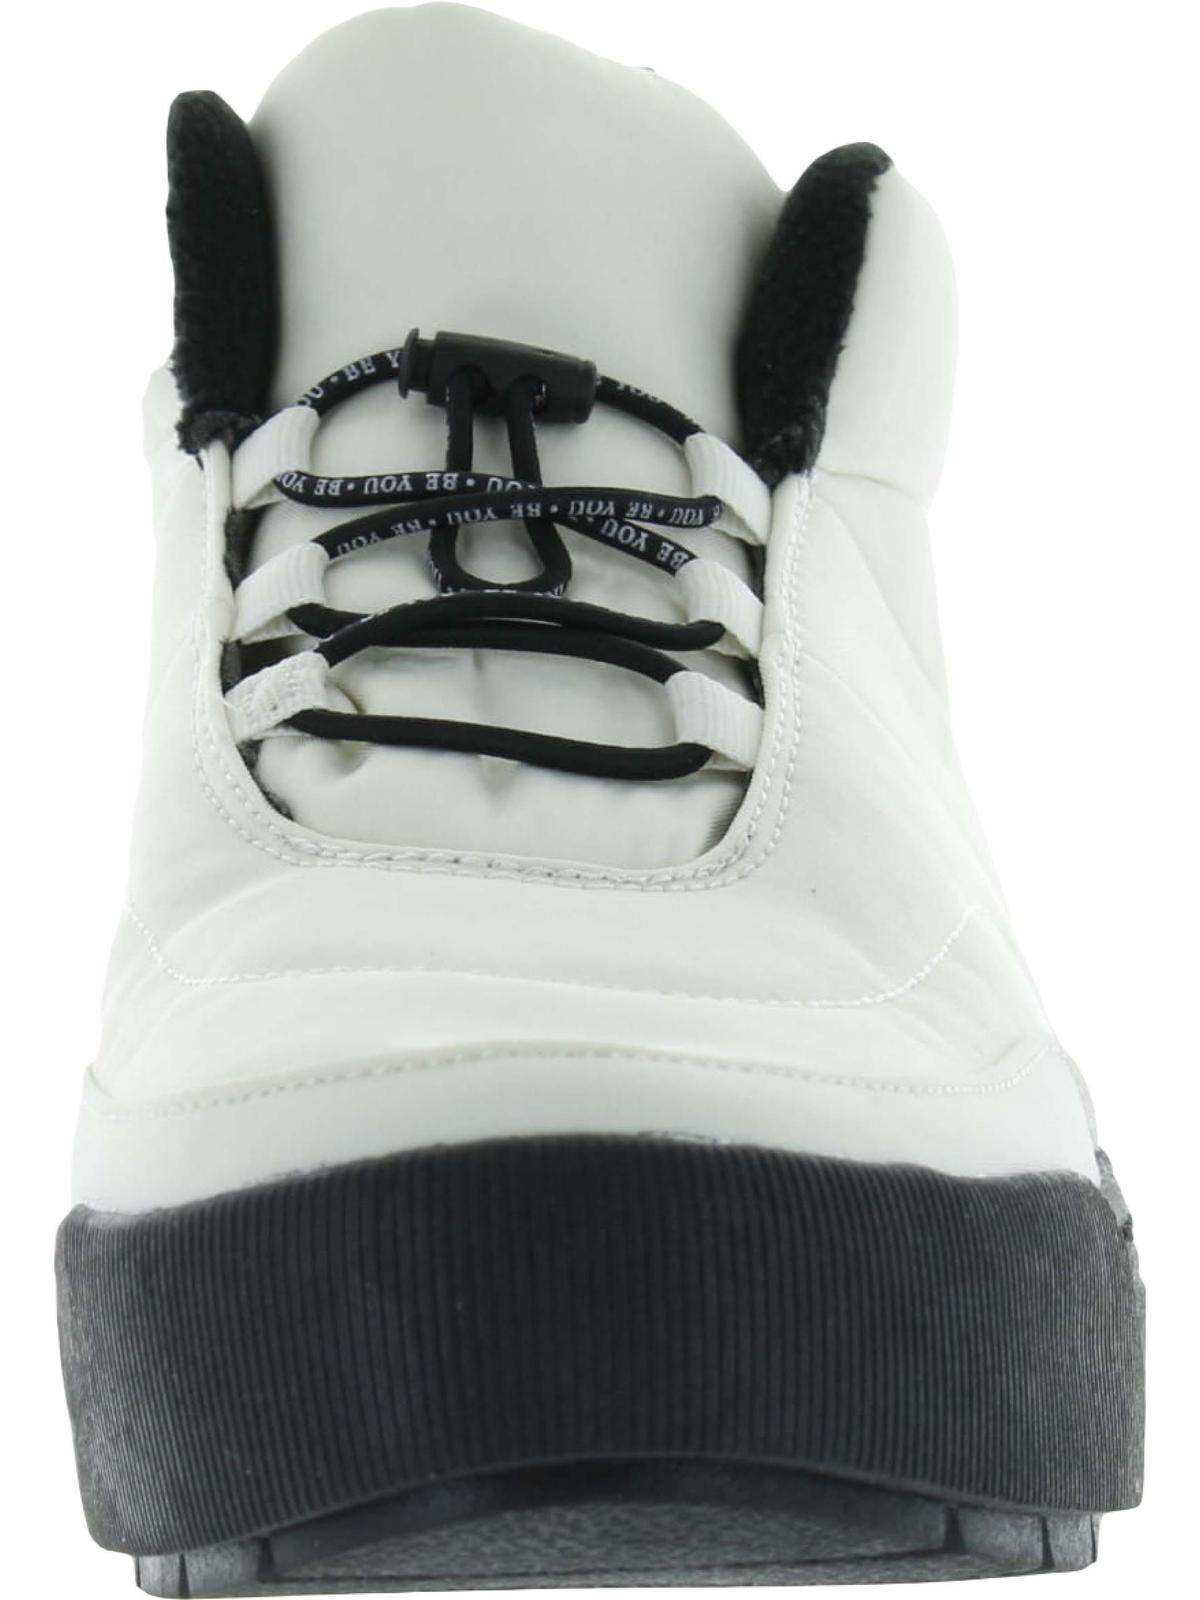 Dr. Scholl's Shoes Womens Time Ski Manmade Lace Up Casual and Fashion Sneakers - image 3 of 3